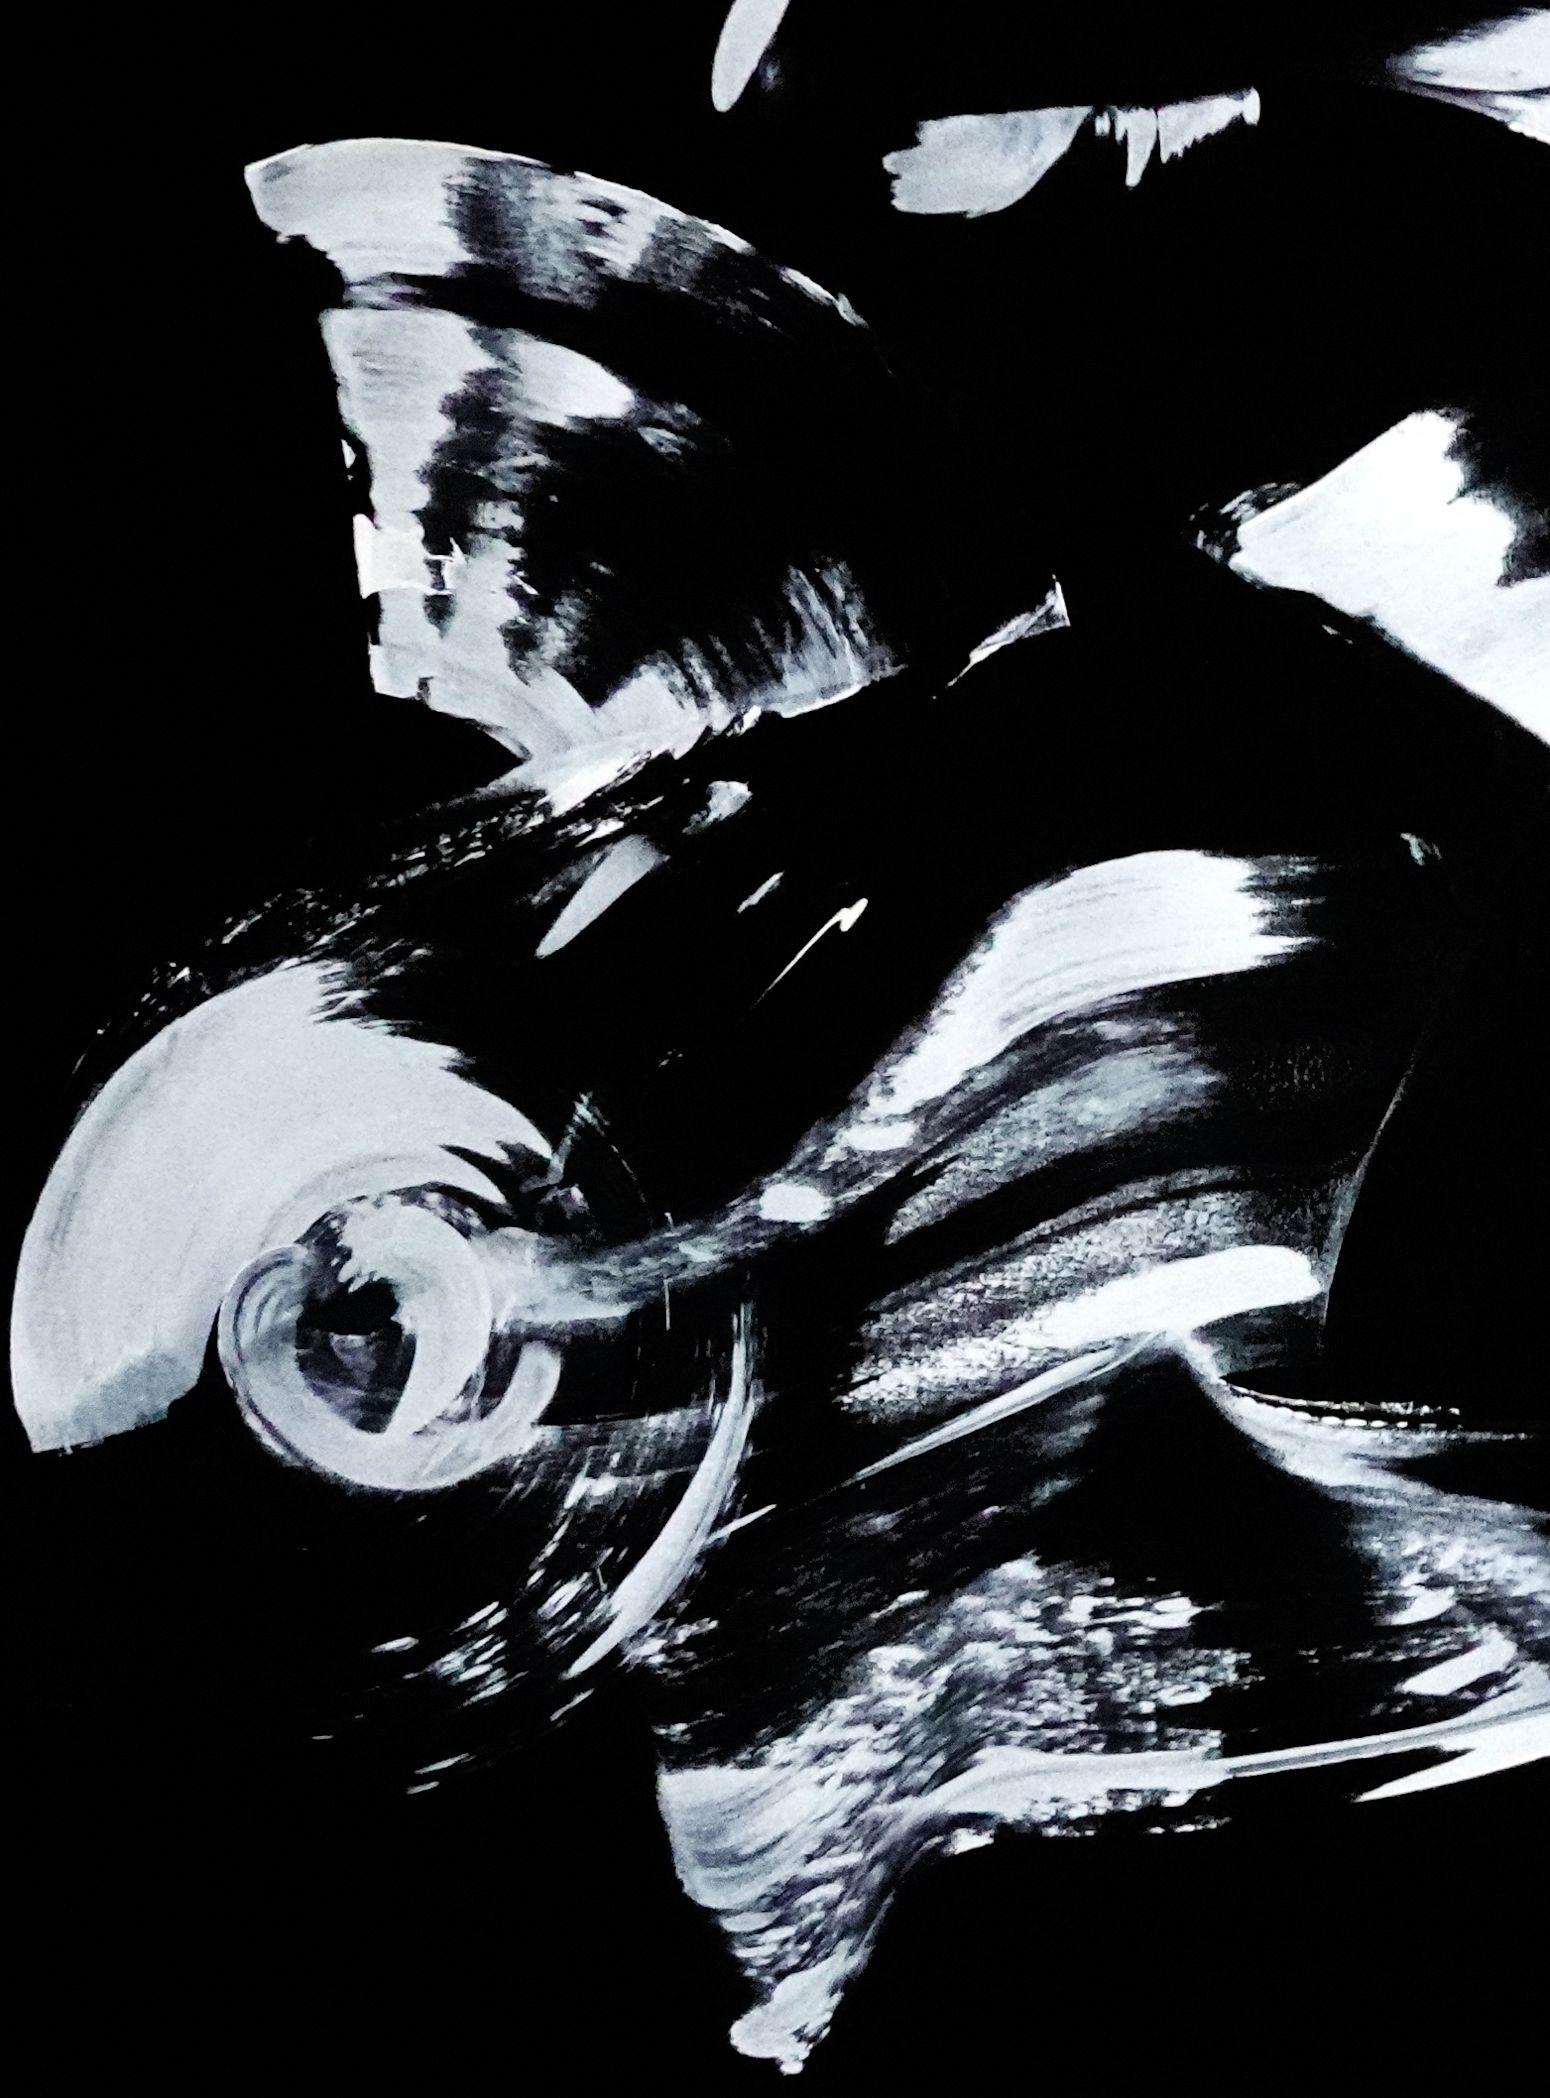 Scooter, Painting, Acrylic on Canvas - Black Abstract Painting by Newel Hunter